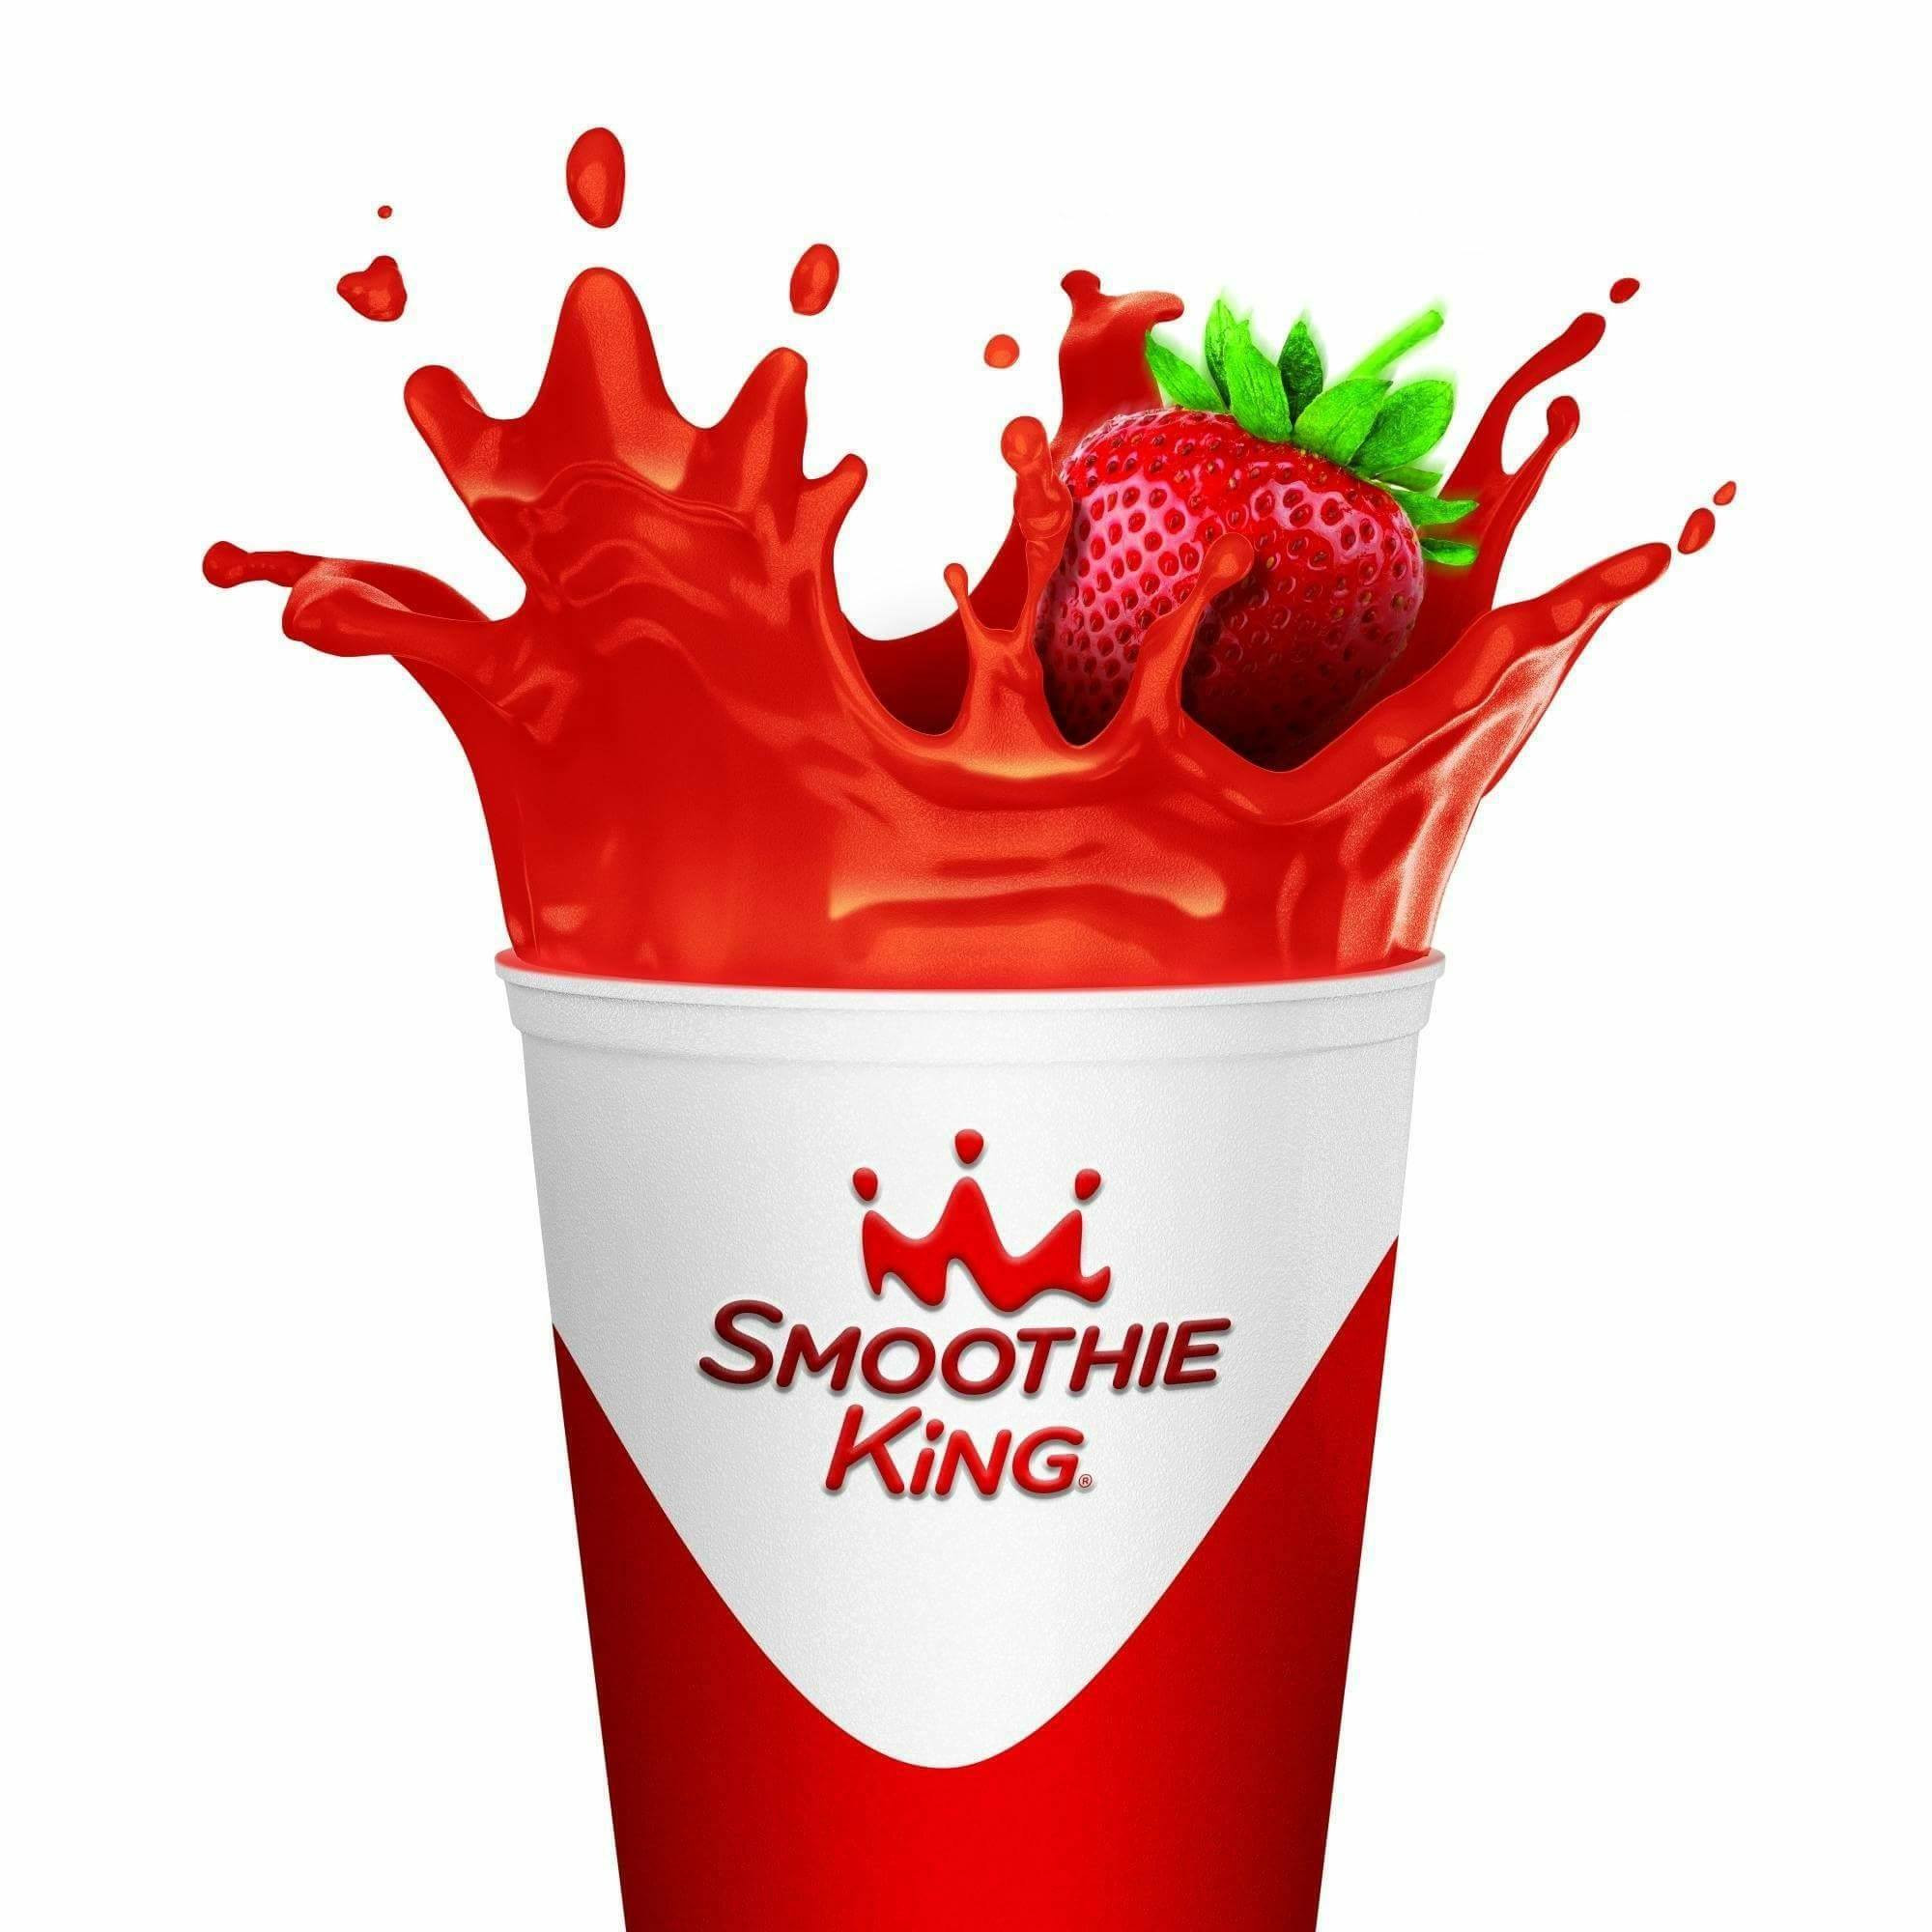 Healthy Smoothies At Smoothie King
 Clients of DMC